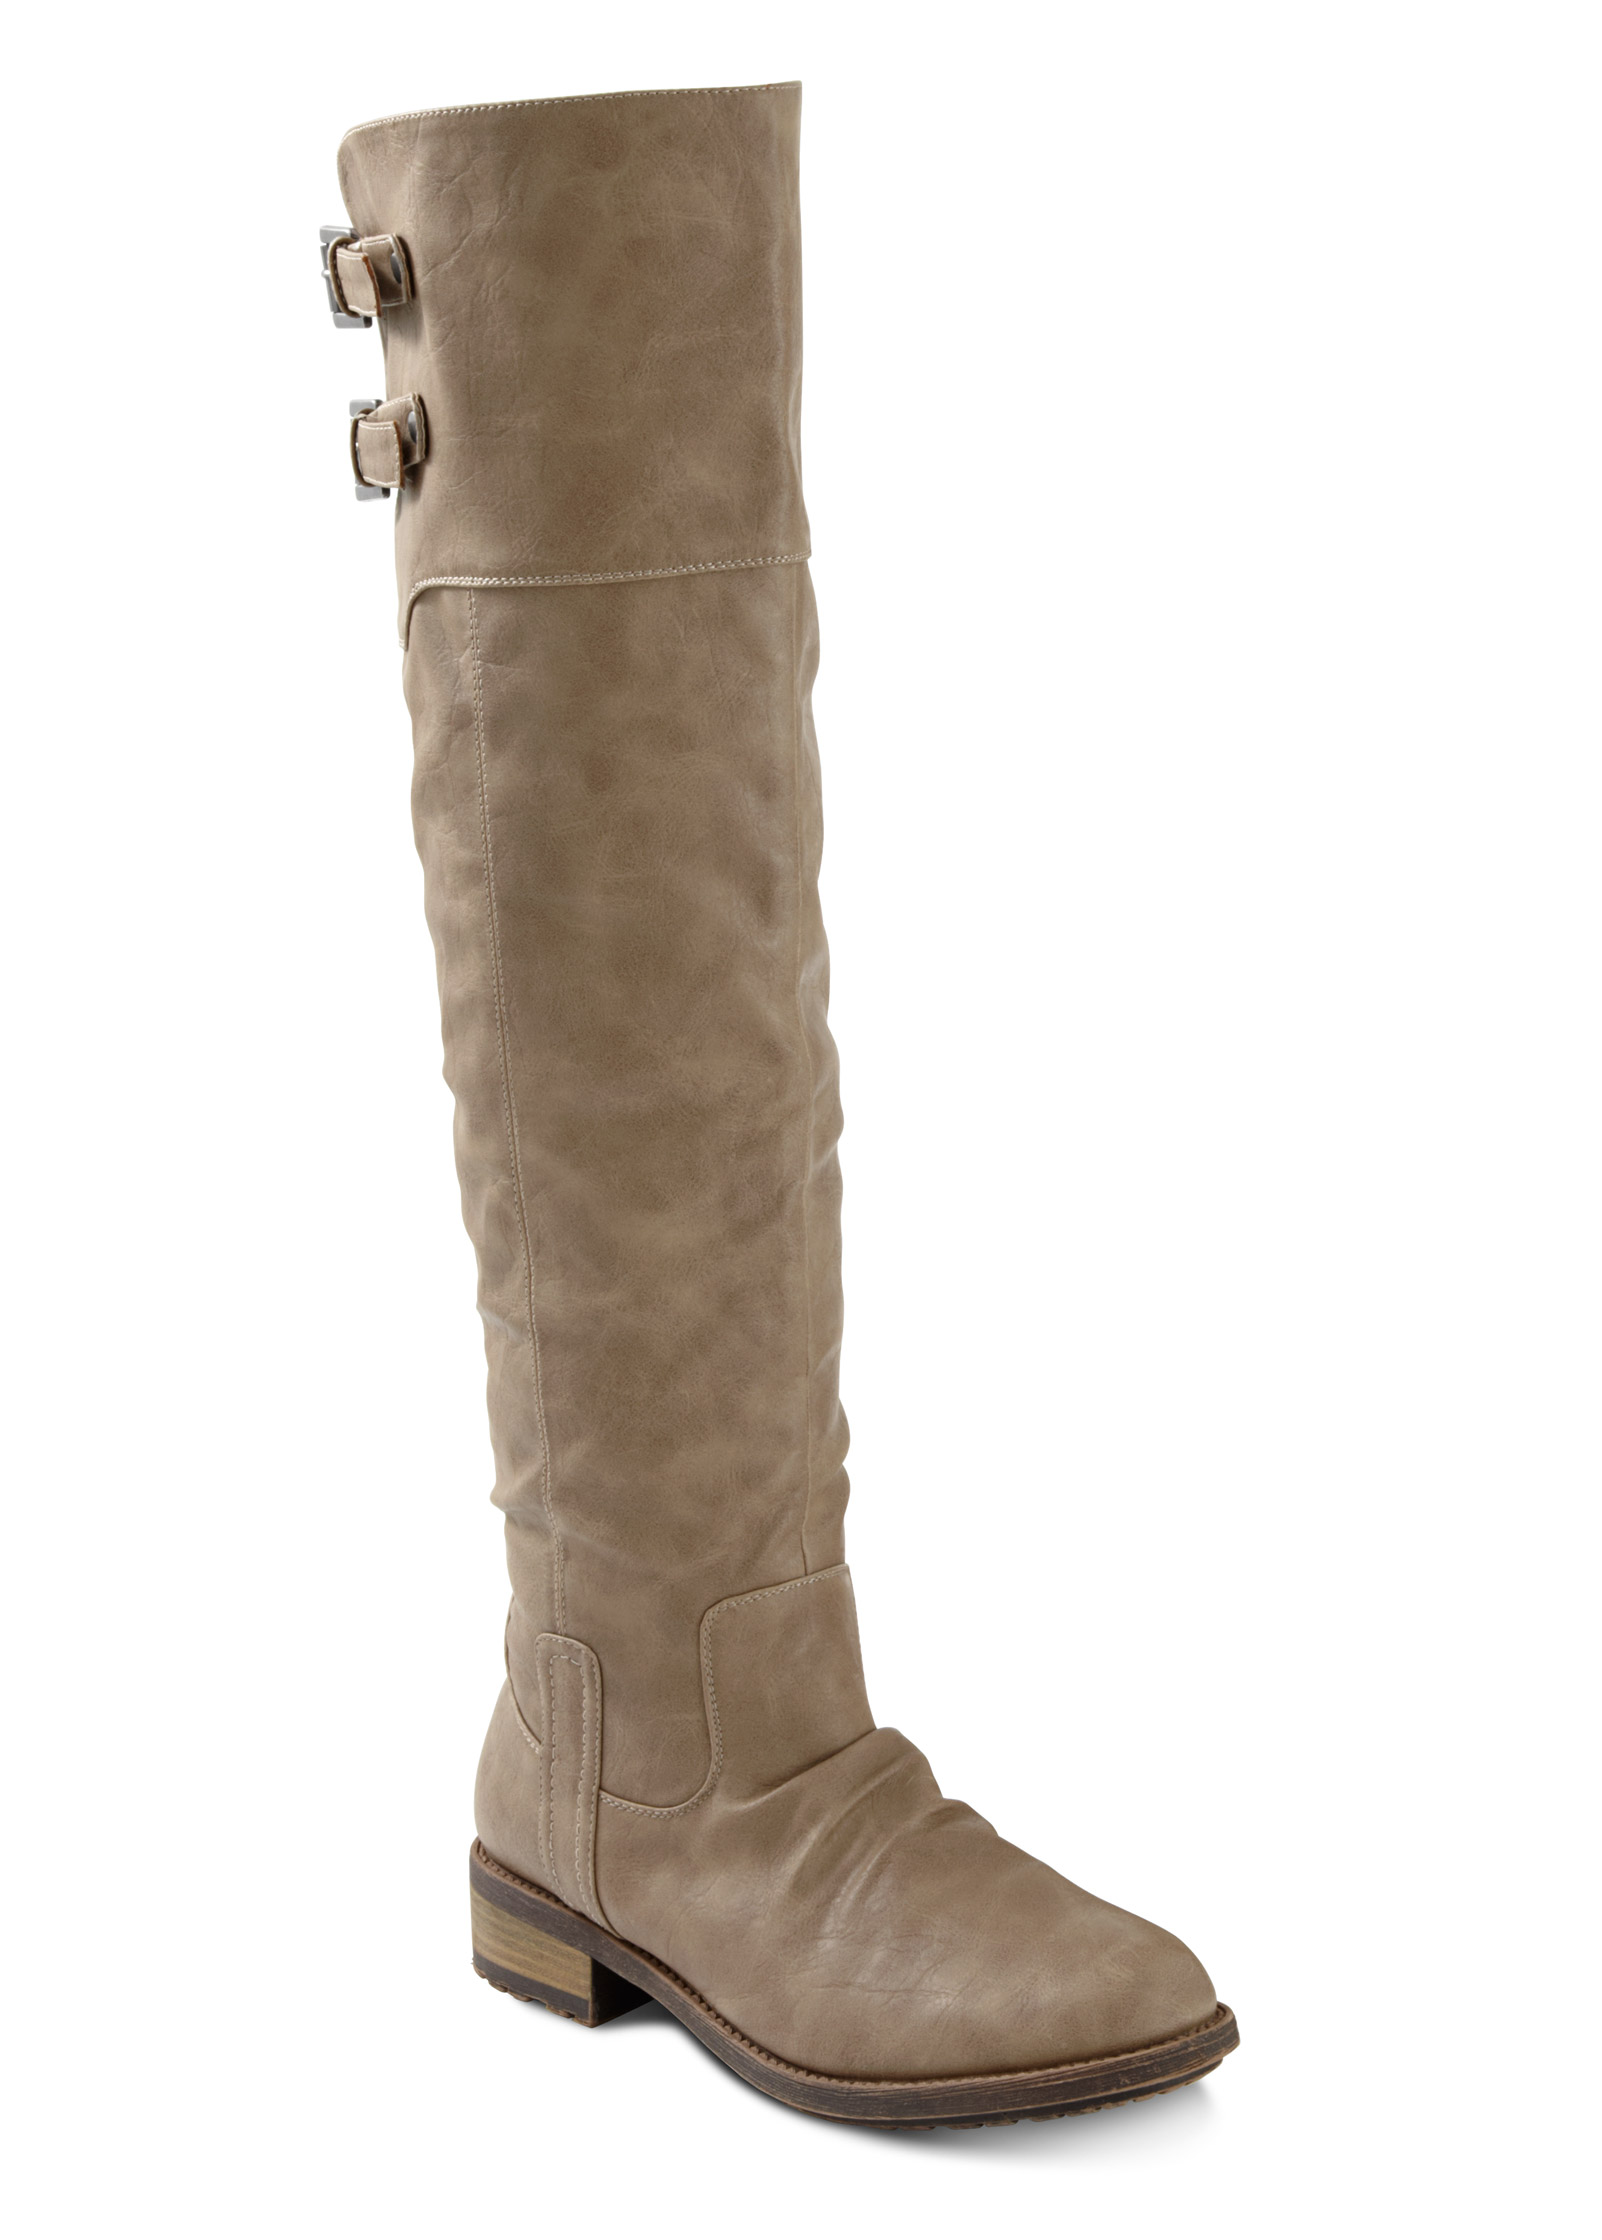 6s knee high boots